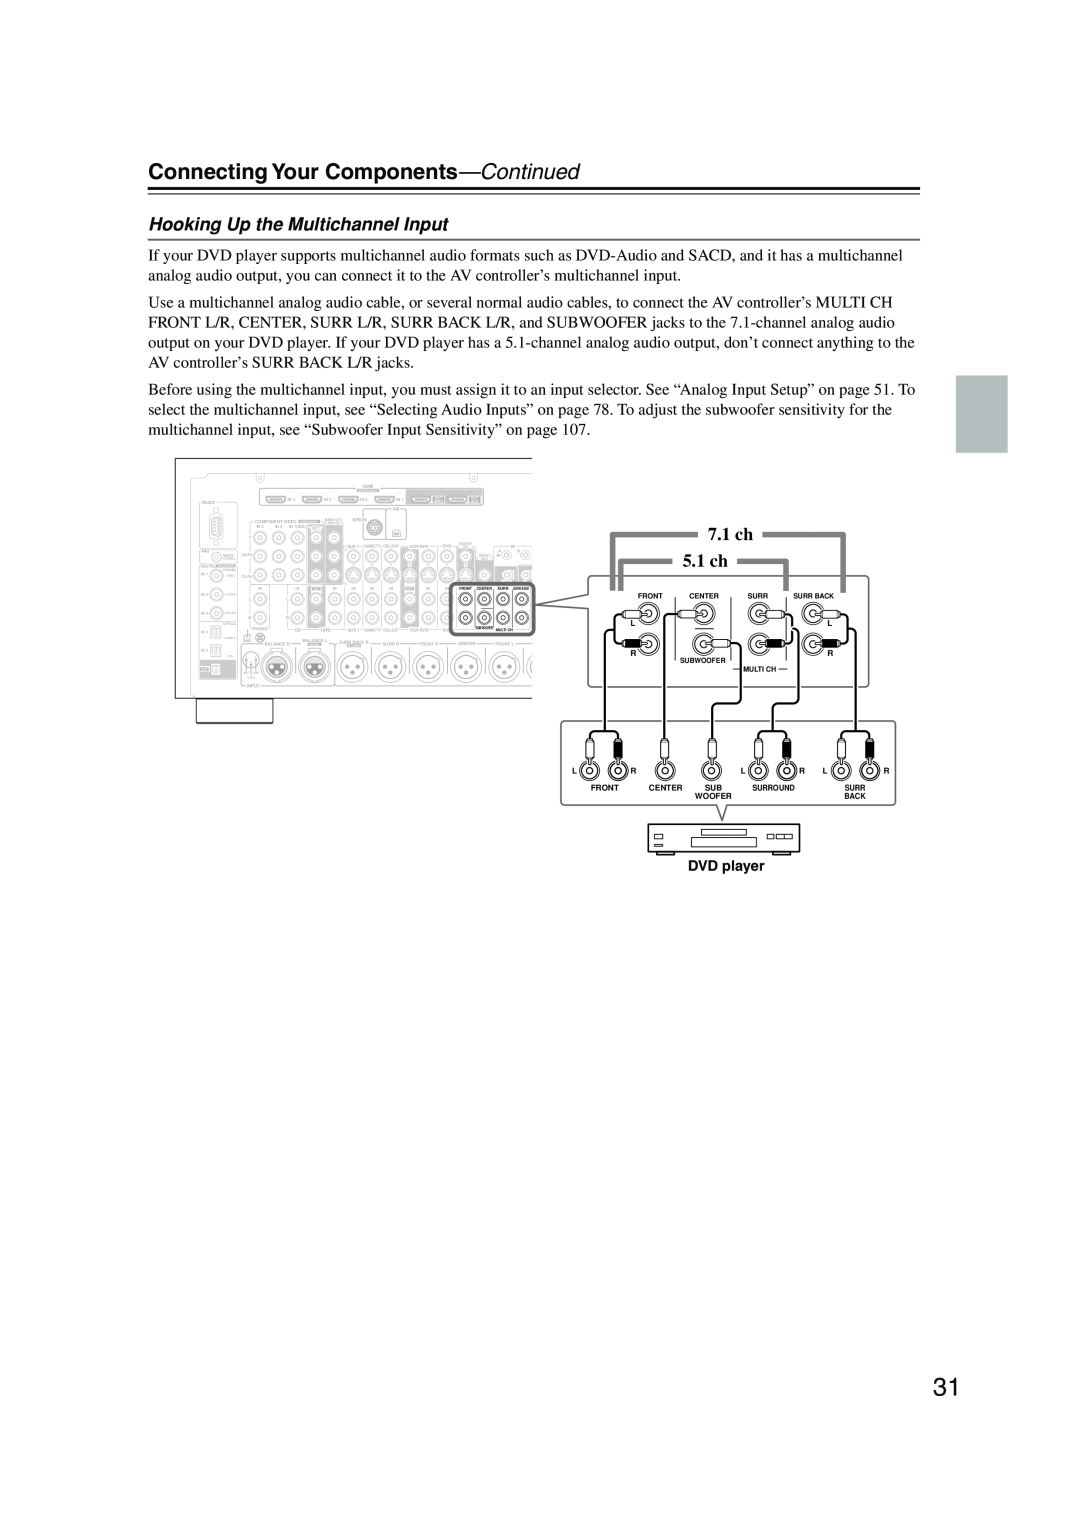 Onkyo PR-SC885 instruction manual Hooking Up the Multichannel Input, 7.1ch 5.1ch, Connecting Your Components-Continued 